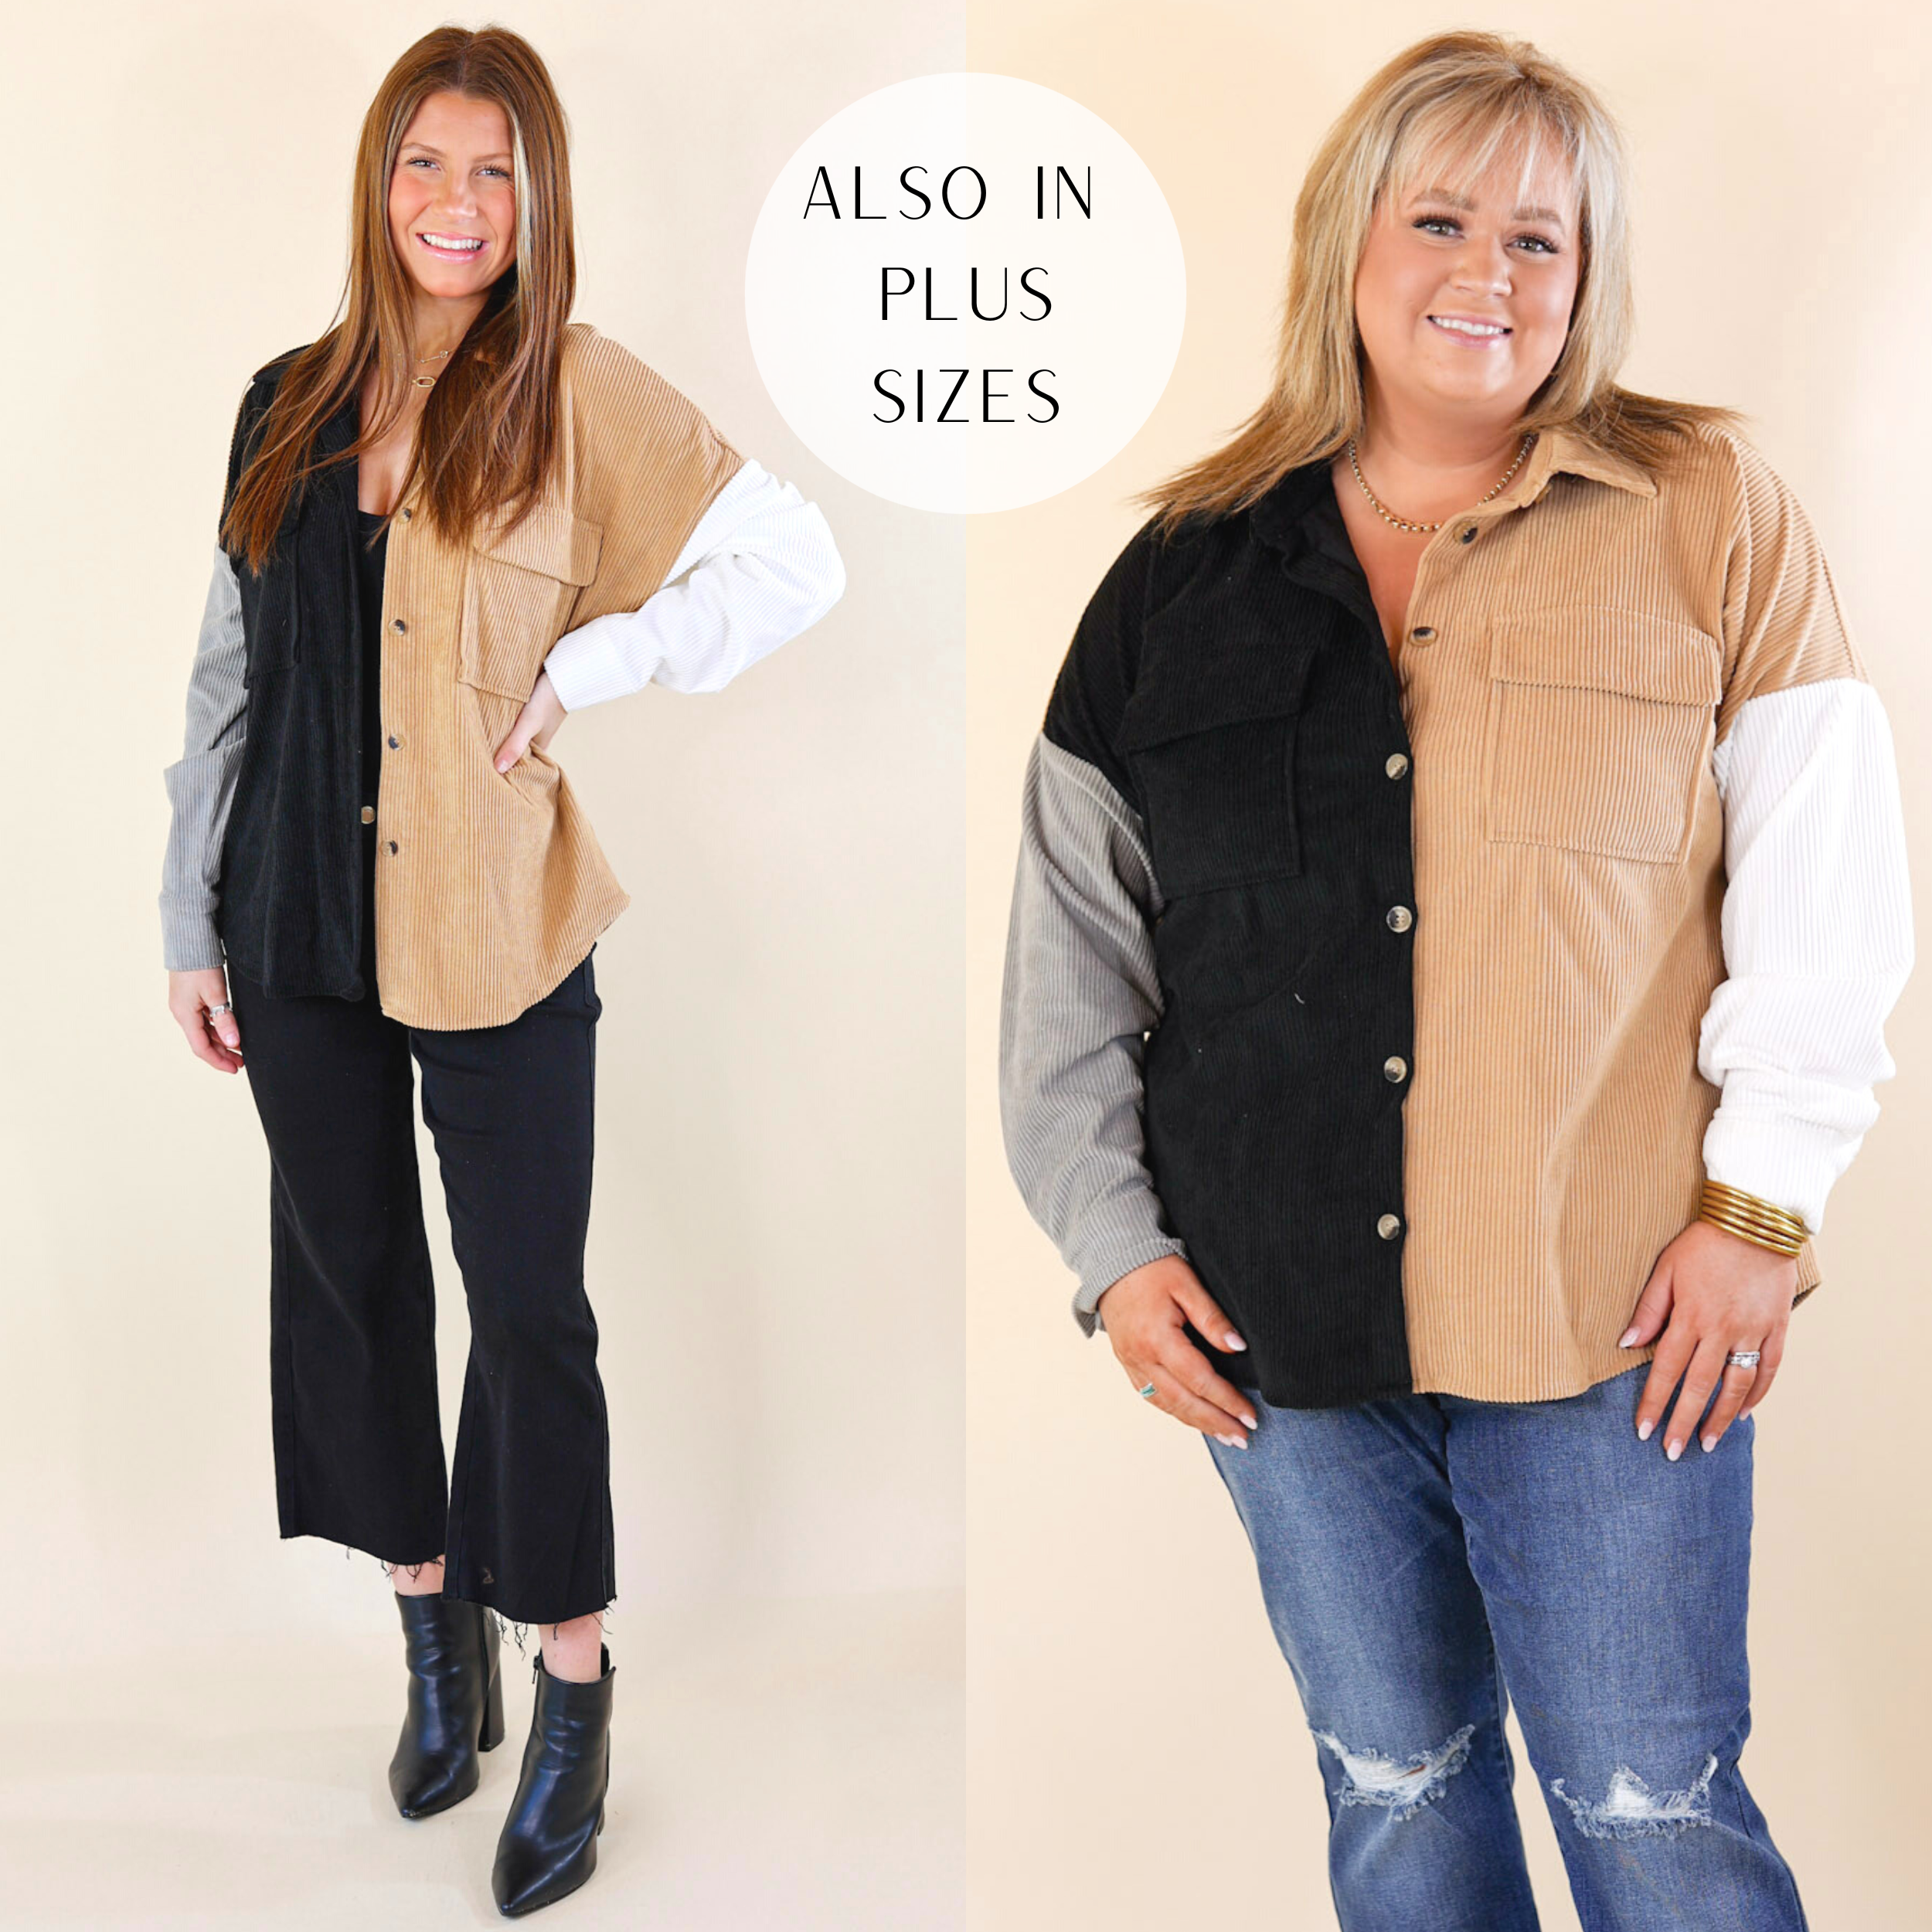 Model has a corduroy shacket with brown and tan color blocks on the left and brown and gray color blocks on the right. Model has this shacket paired with bootcut jeans, black booties, and gold jewelry.